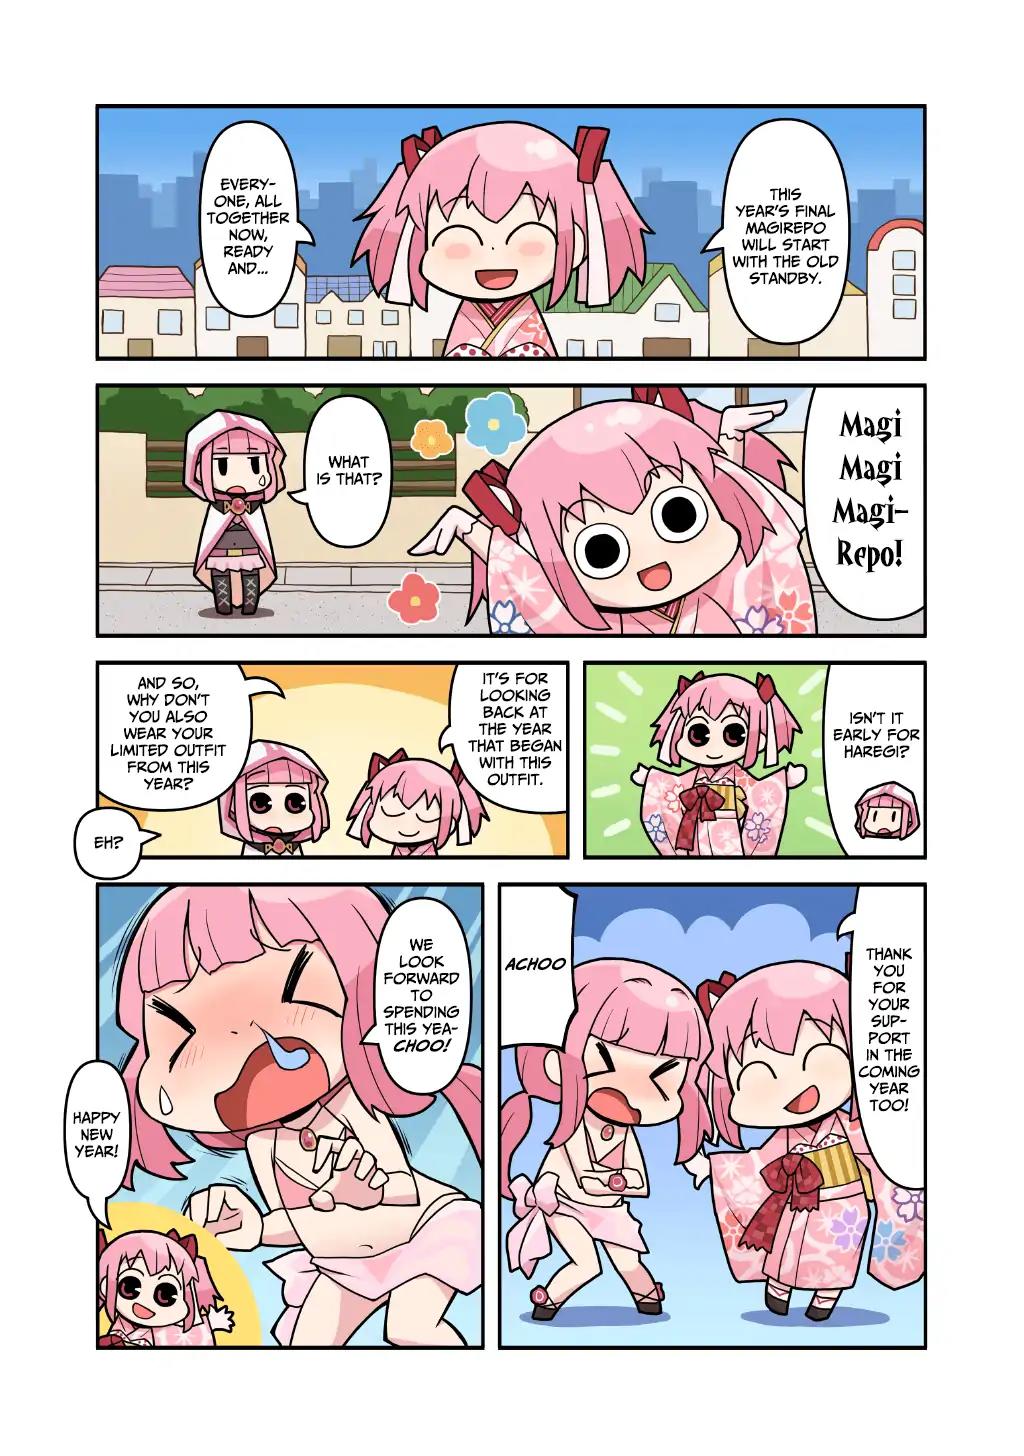 Magia Report Vol.2 Chapter 65